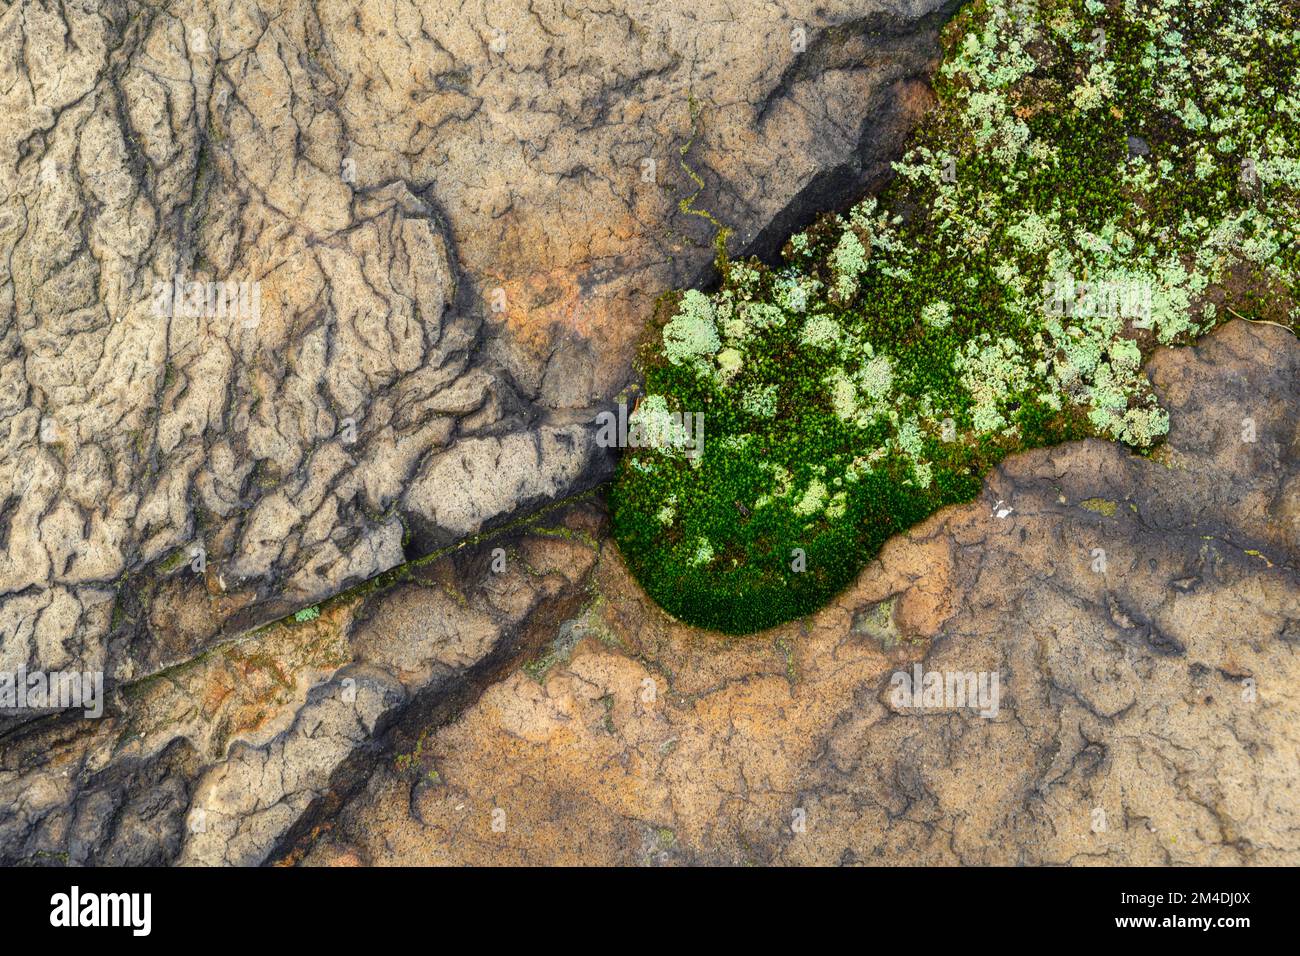 Moss, lichens in a depression in a rock outcrop, Greater Sudbury, Ontario, Canada Stock Photo